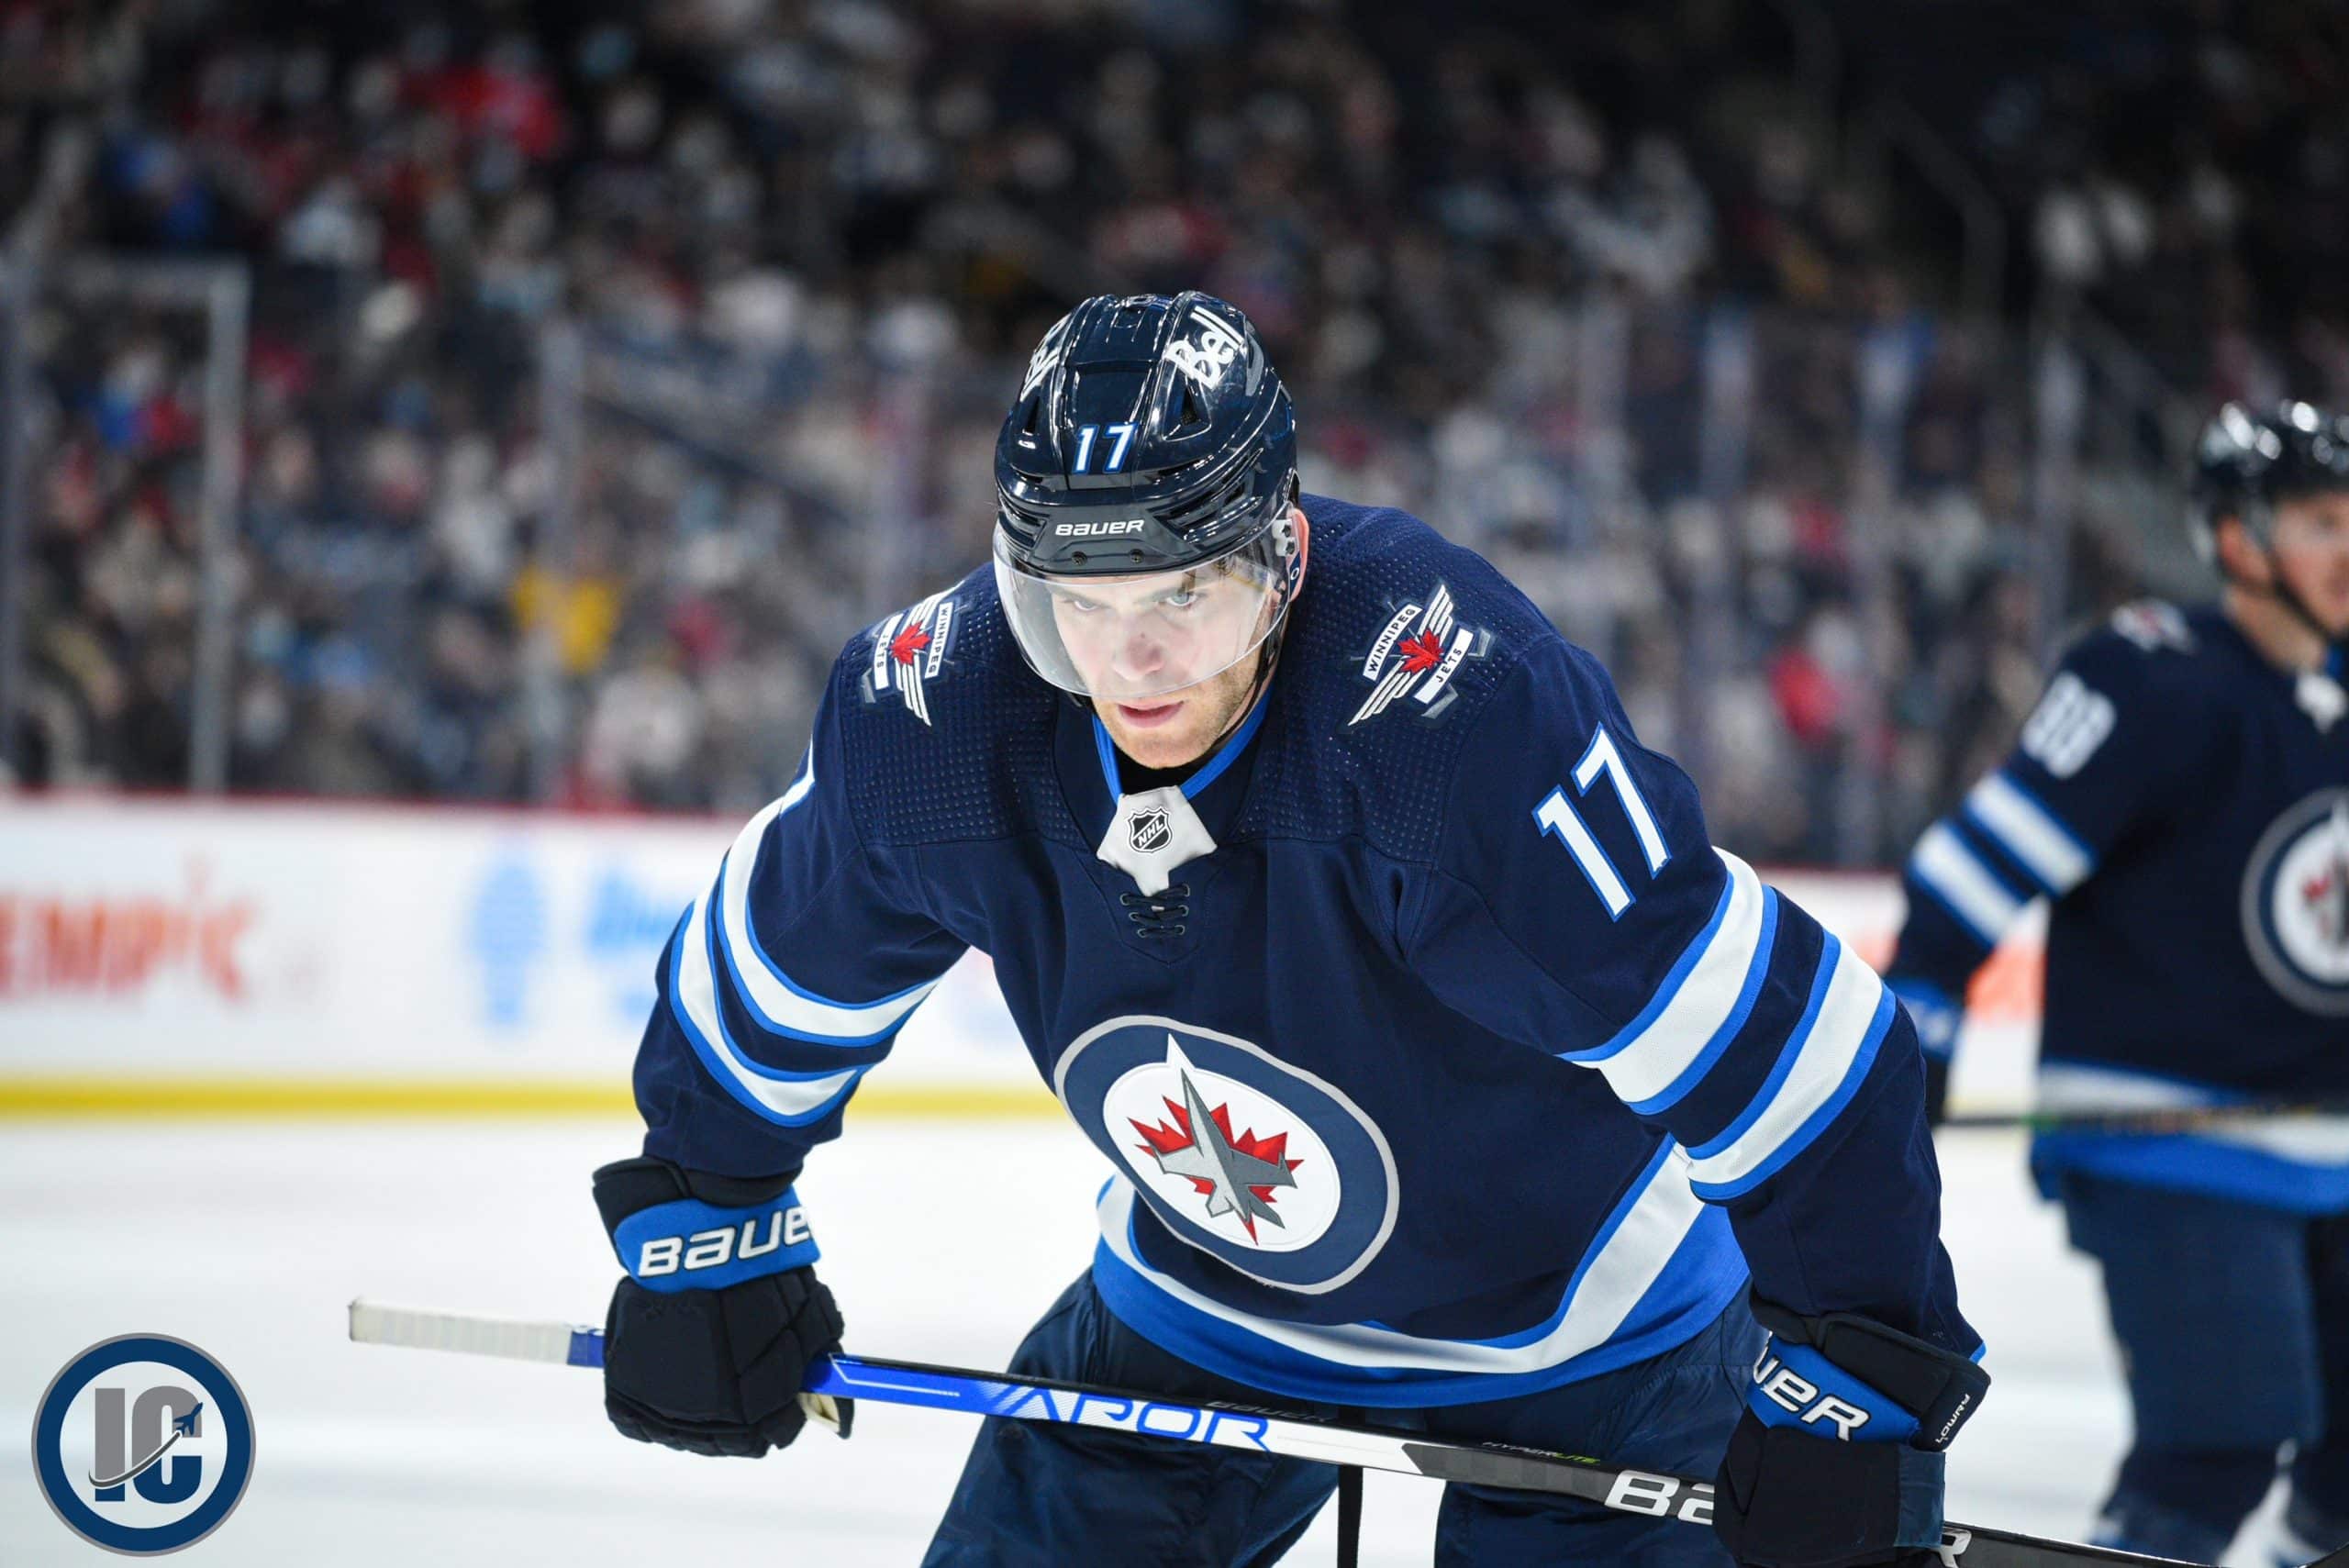 Jets @ Noon, New Winnipeg Jets captain Adam Lowry talks about his new role